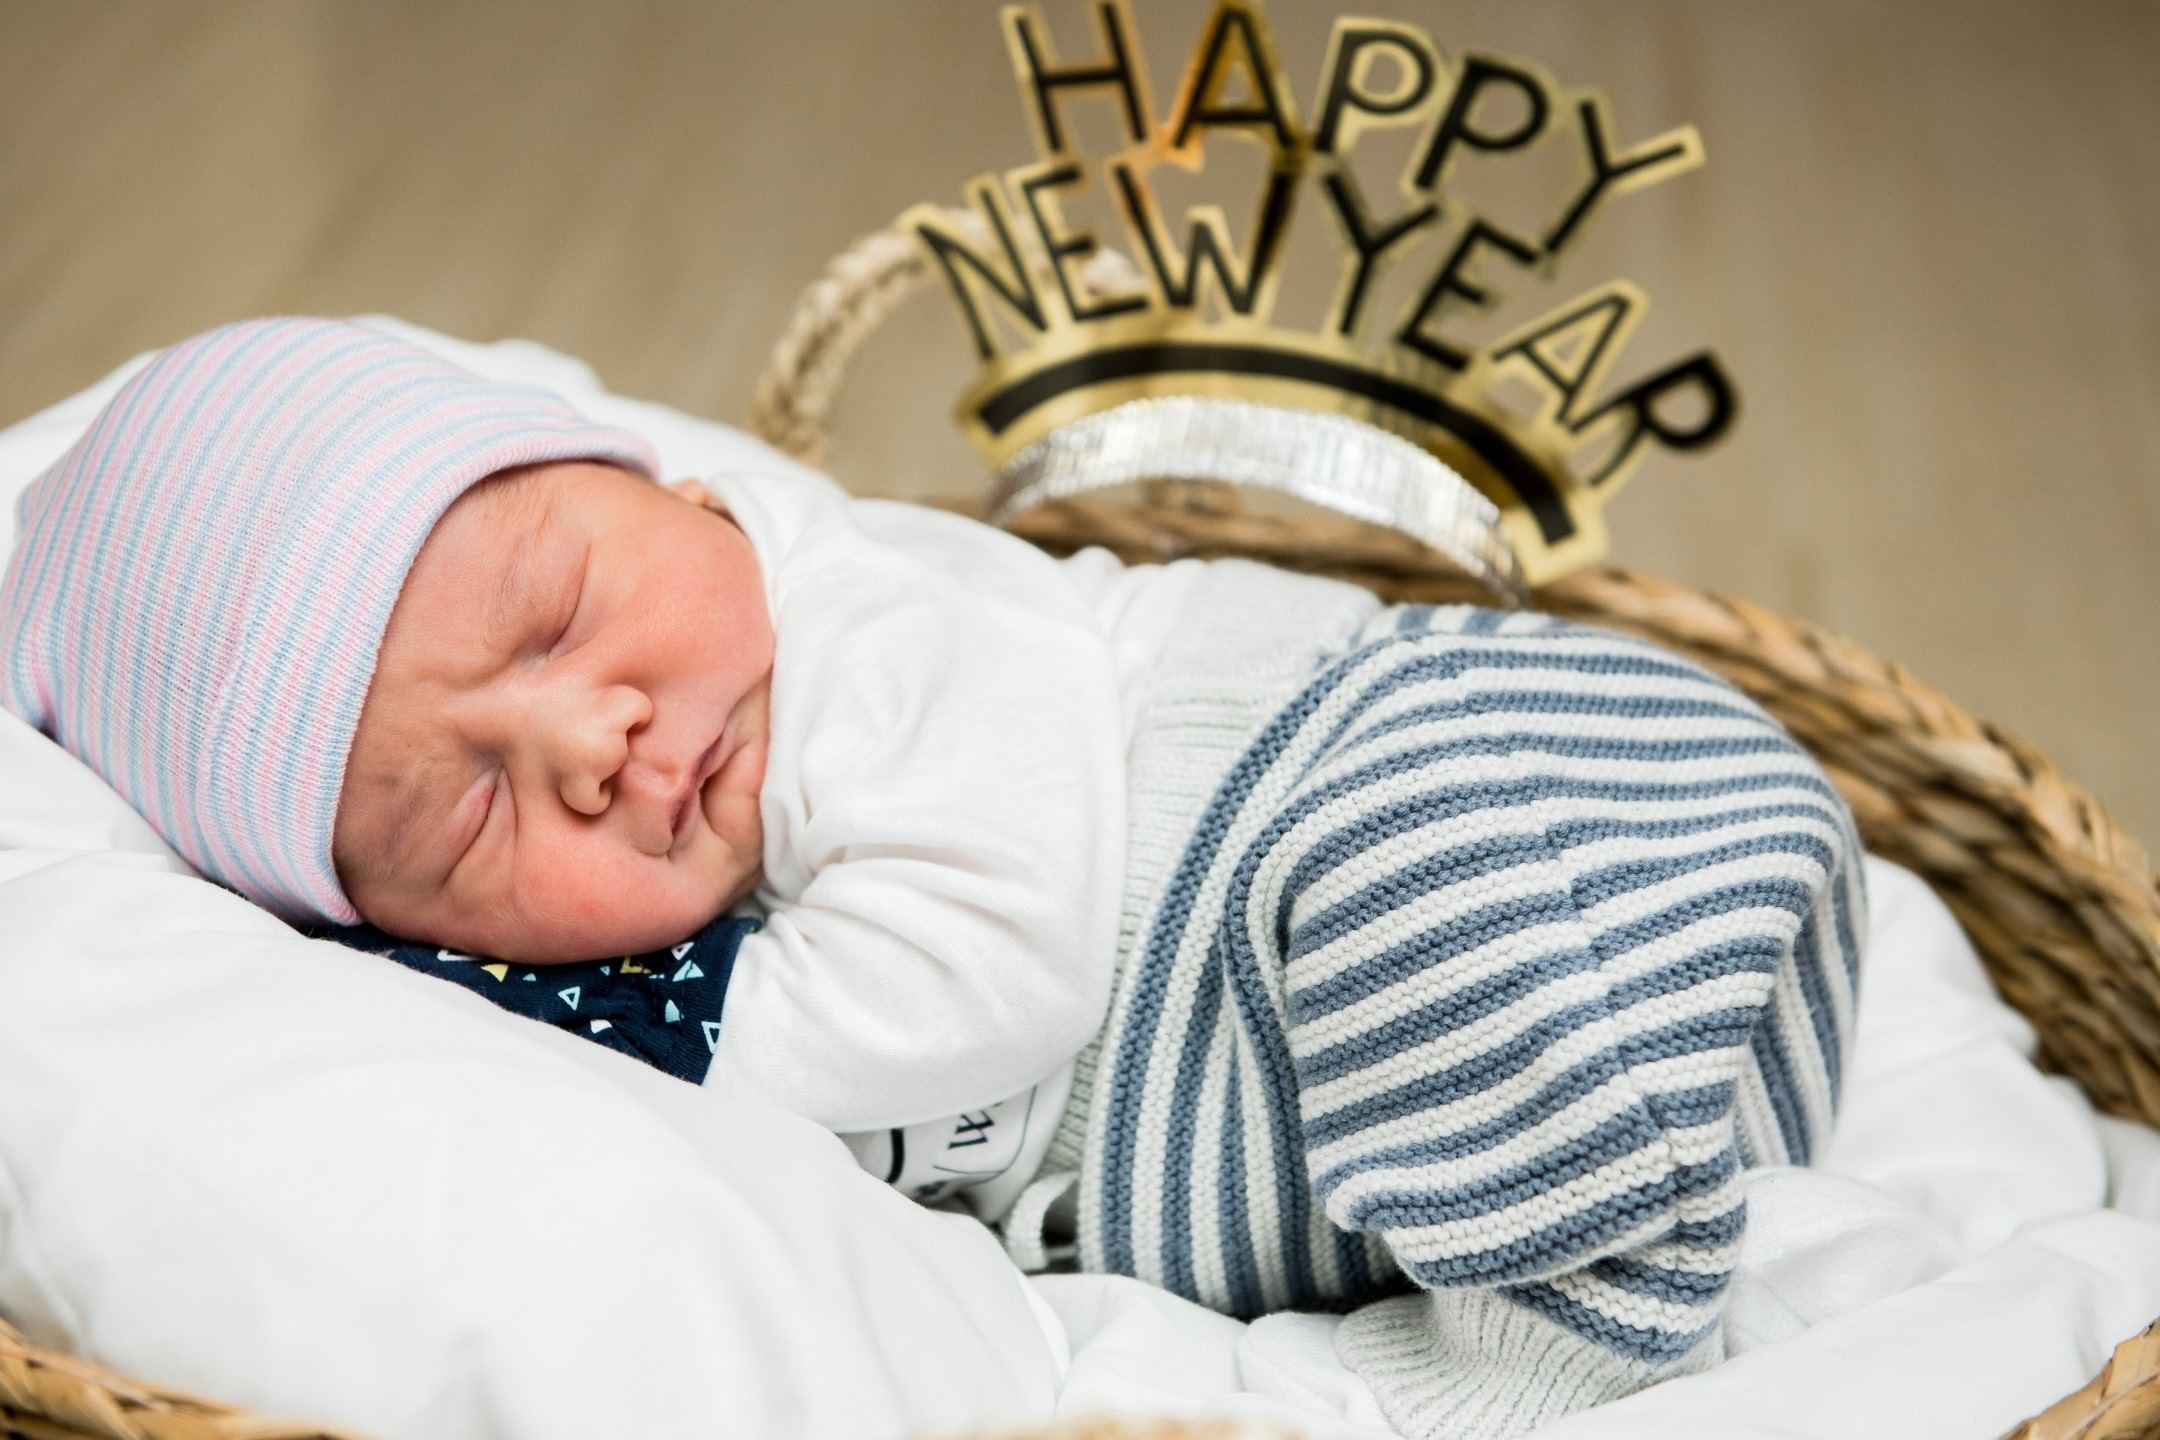 Unbelievable: Baby Born At Midnight On New Year’s Eve – Year And Date Revealed!